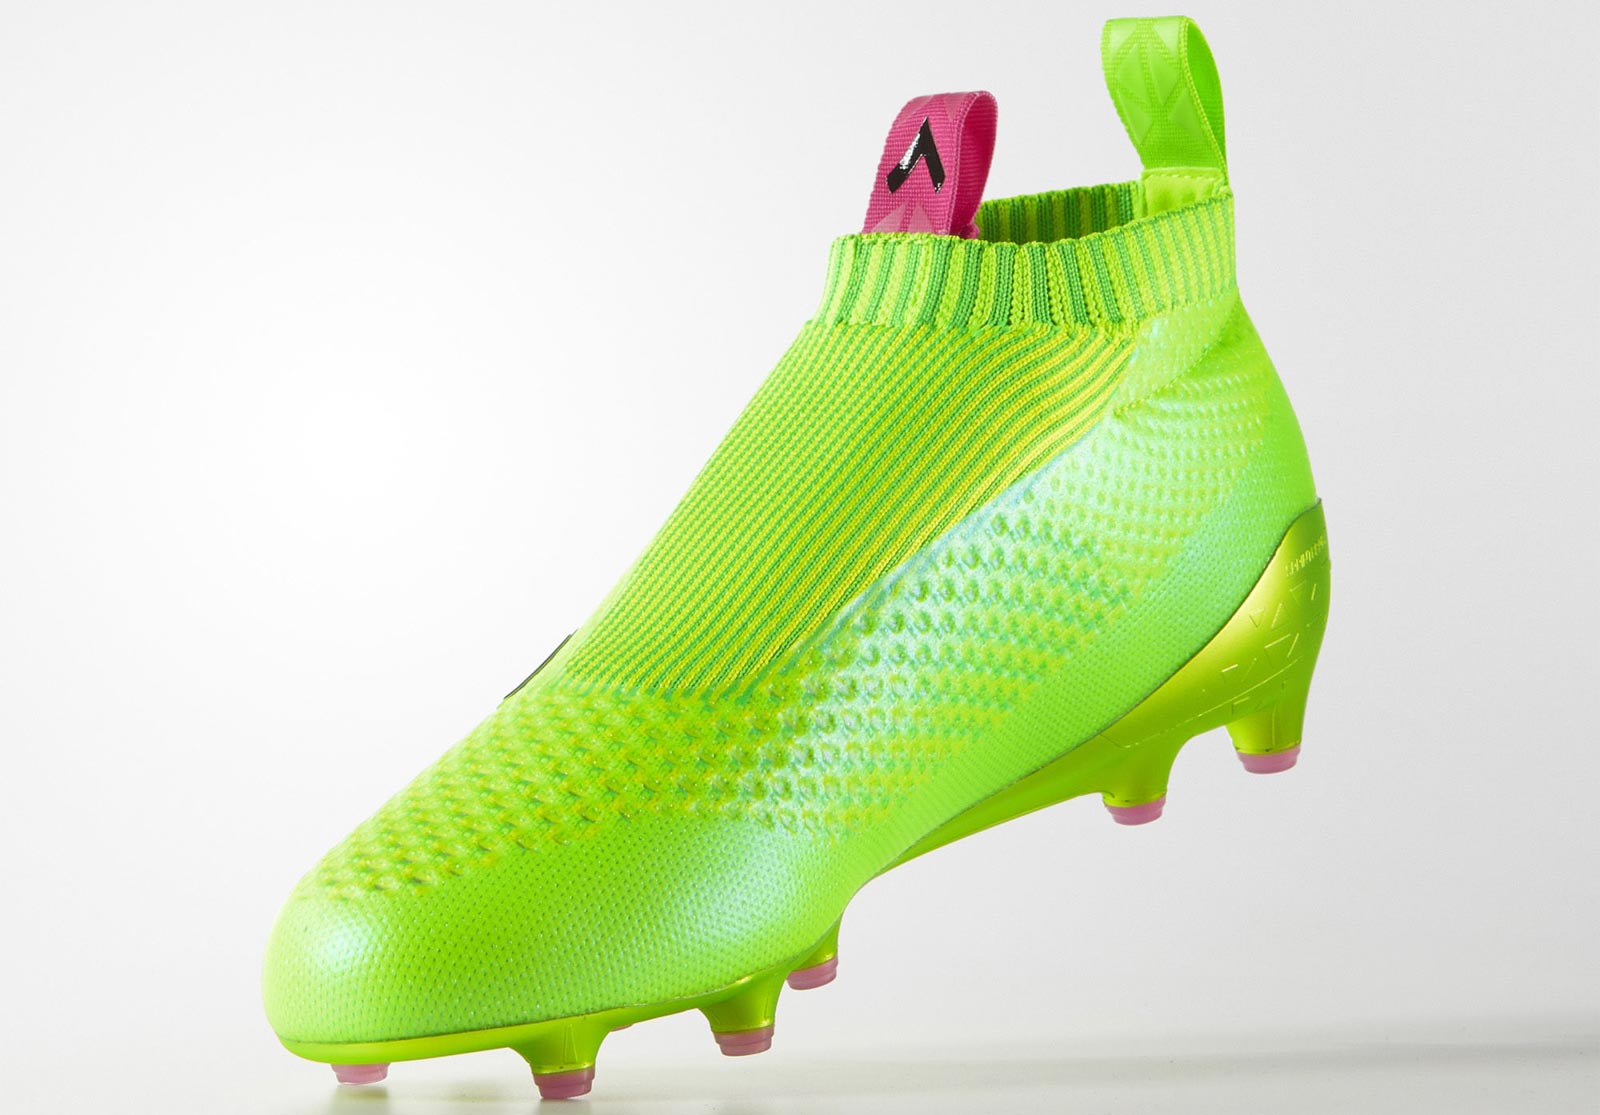 levend Oxideren breken First-Ever Adidas Ace 16+ PureControl Boots Released - Footy Headlines